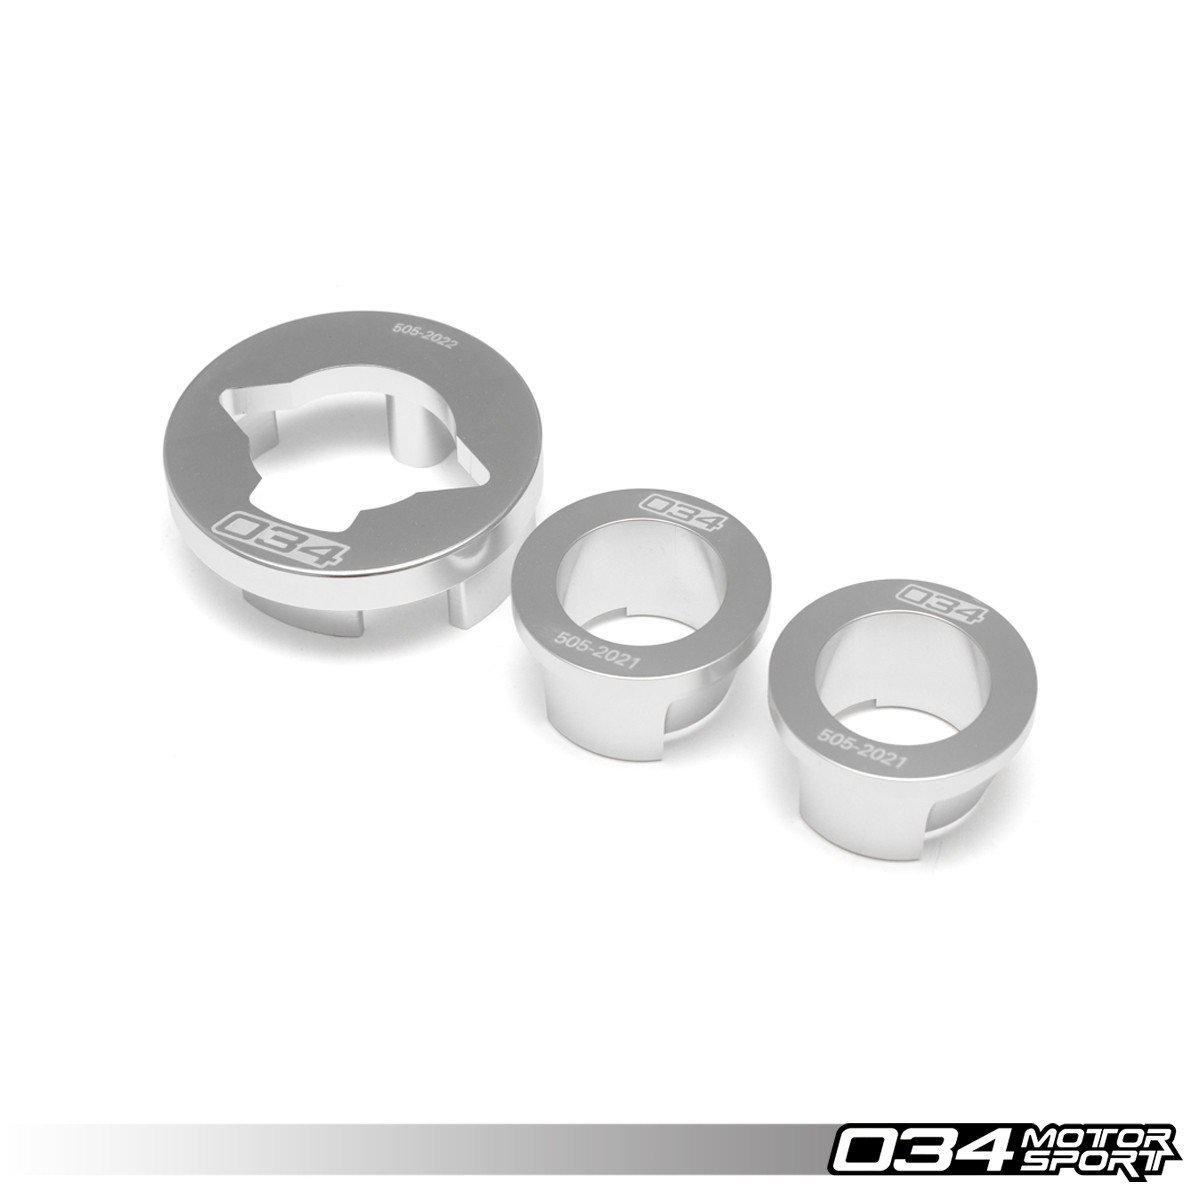 Billet Aluminum Rear Differential Mount Insert Kit, B9 Audi A4/S4/S5/RS5 &amp; Allroad-A Little Tuning Co